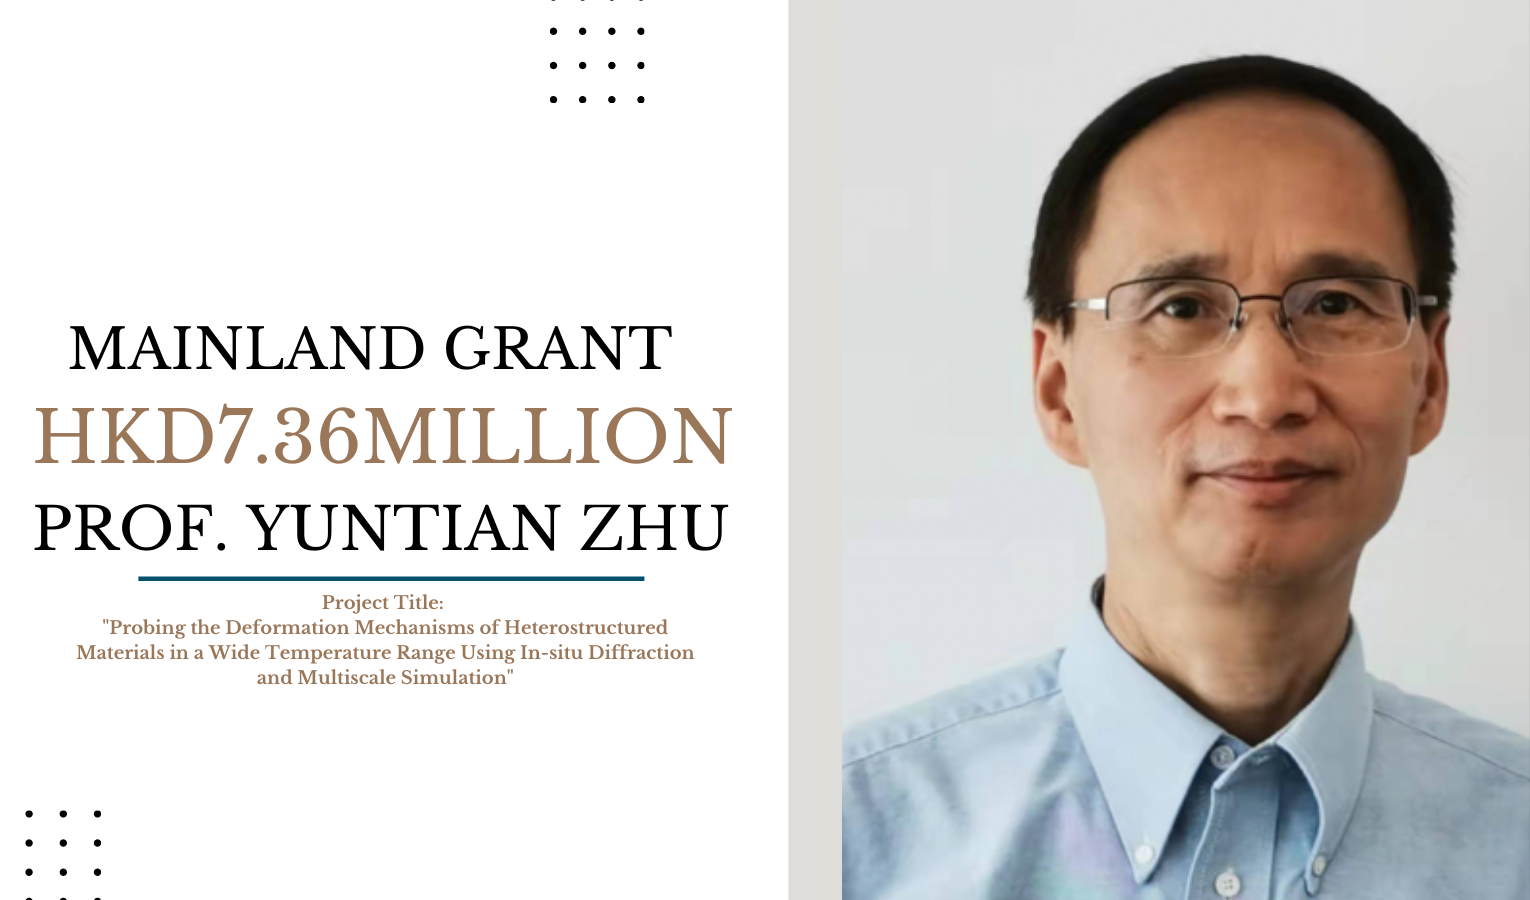 Prof. Yuntian Zhu’s team received a HK$7.36M Mainland Key Project Grant from the Ministry of Science and Technology of China